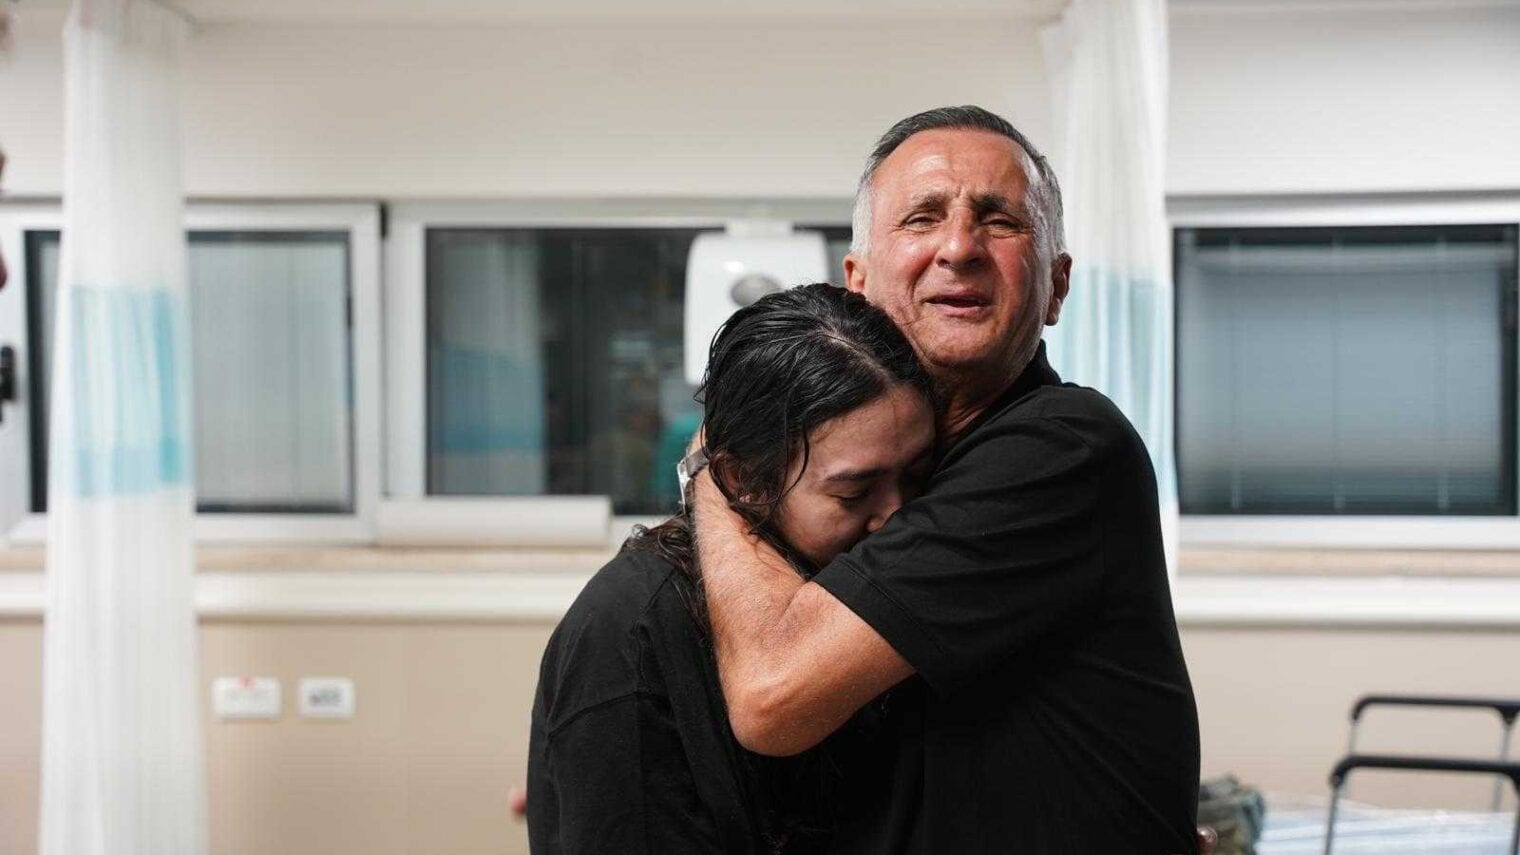 Noa Argamani with her father upon being back in Israel. Photo by The IDF Spokesperson’s Unit